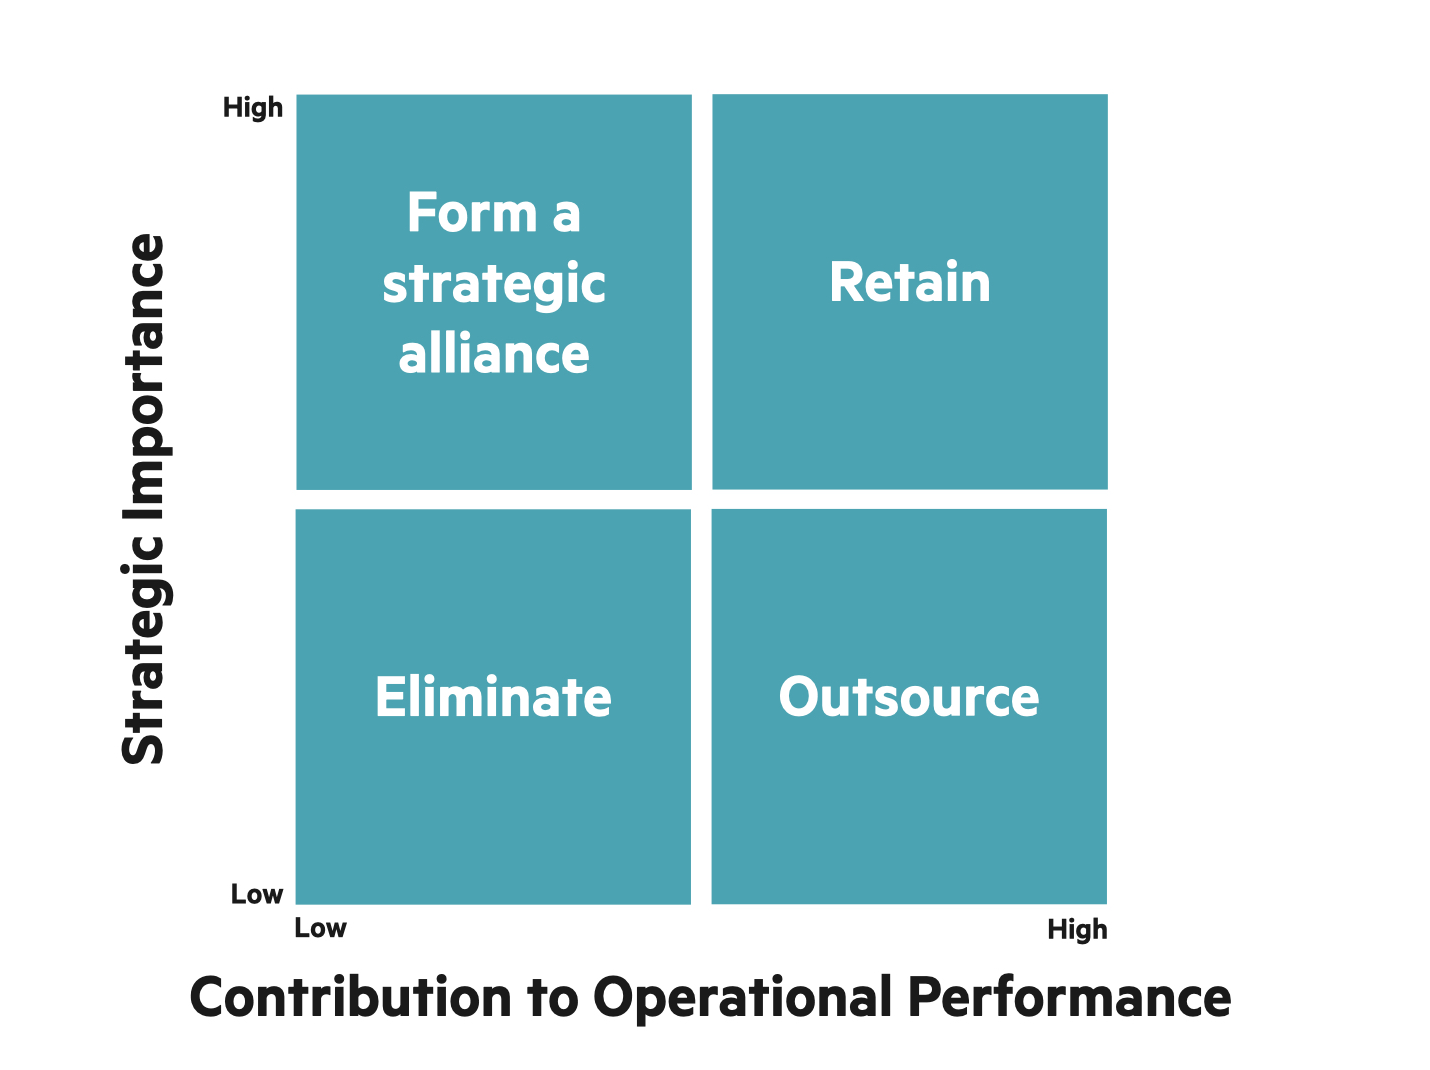 Quadrant with two axes: strategic importance and contribution to operational performance, as described below